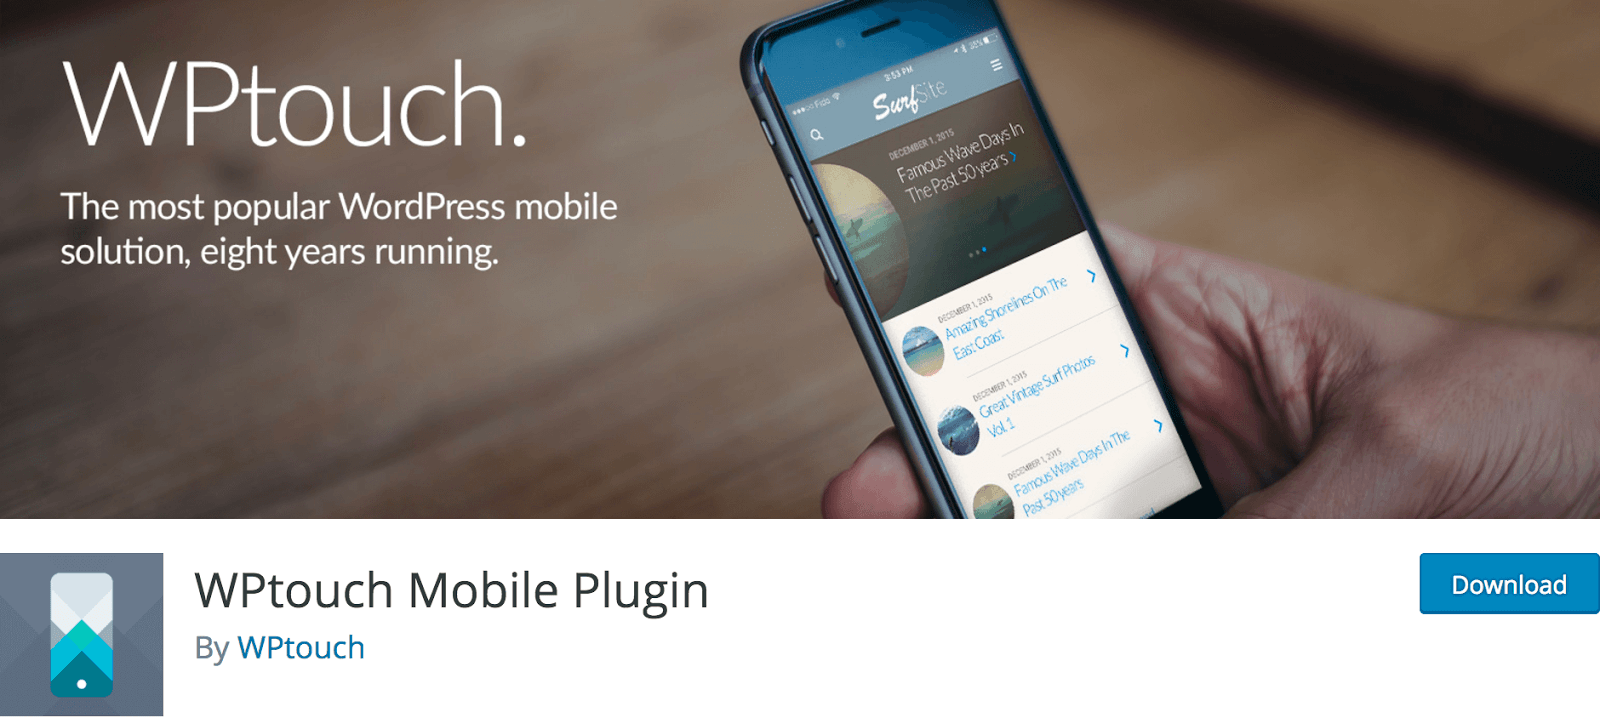 WPtouch mobile-friendly testing tool 